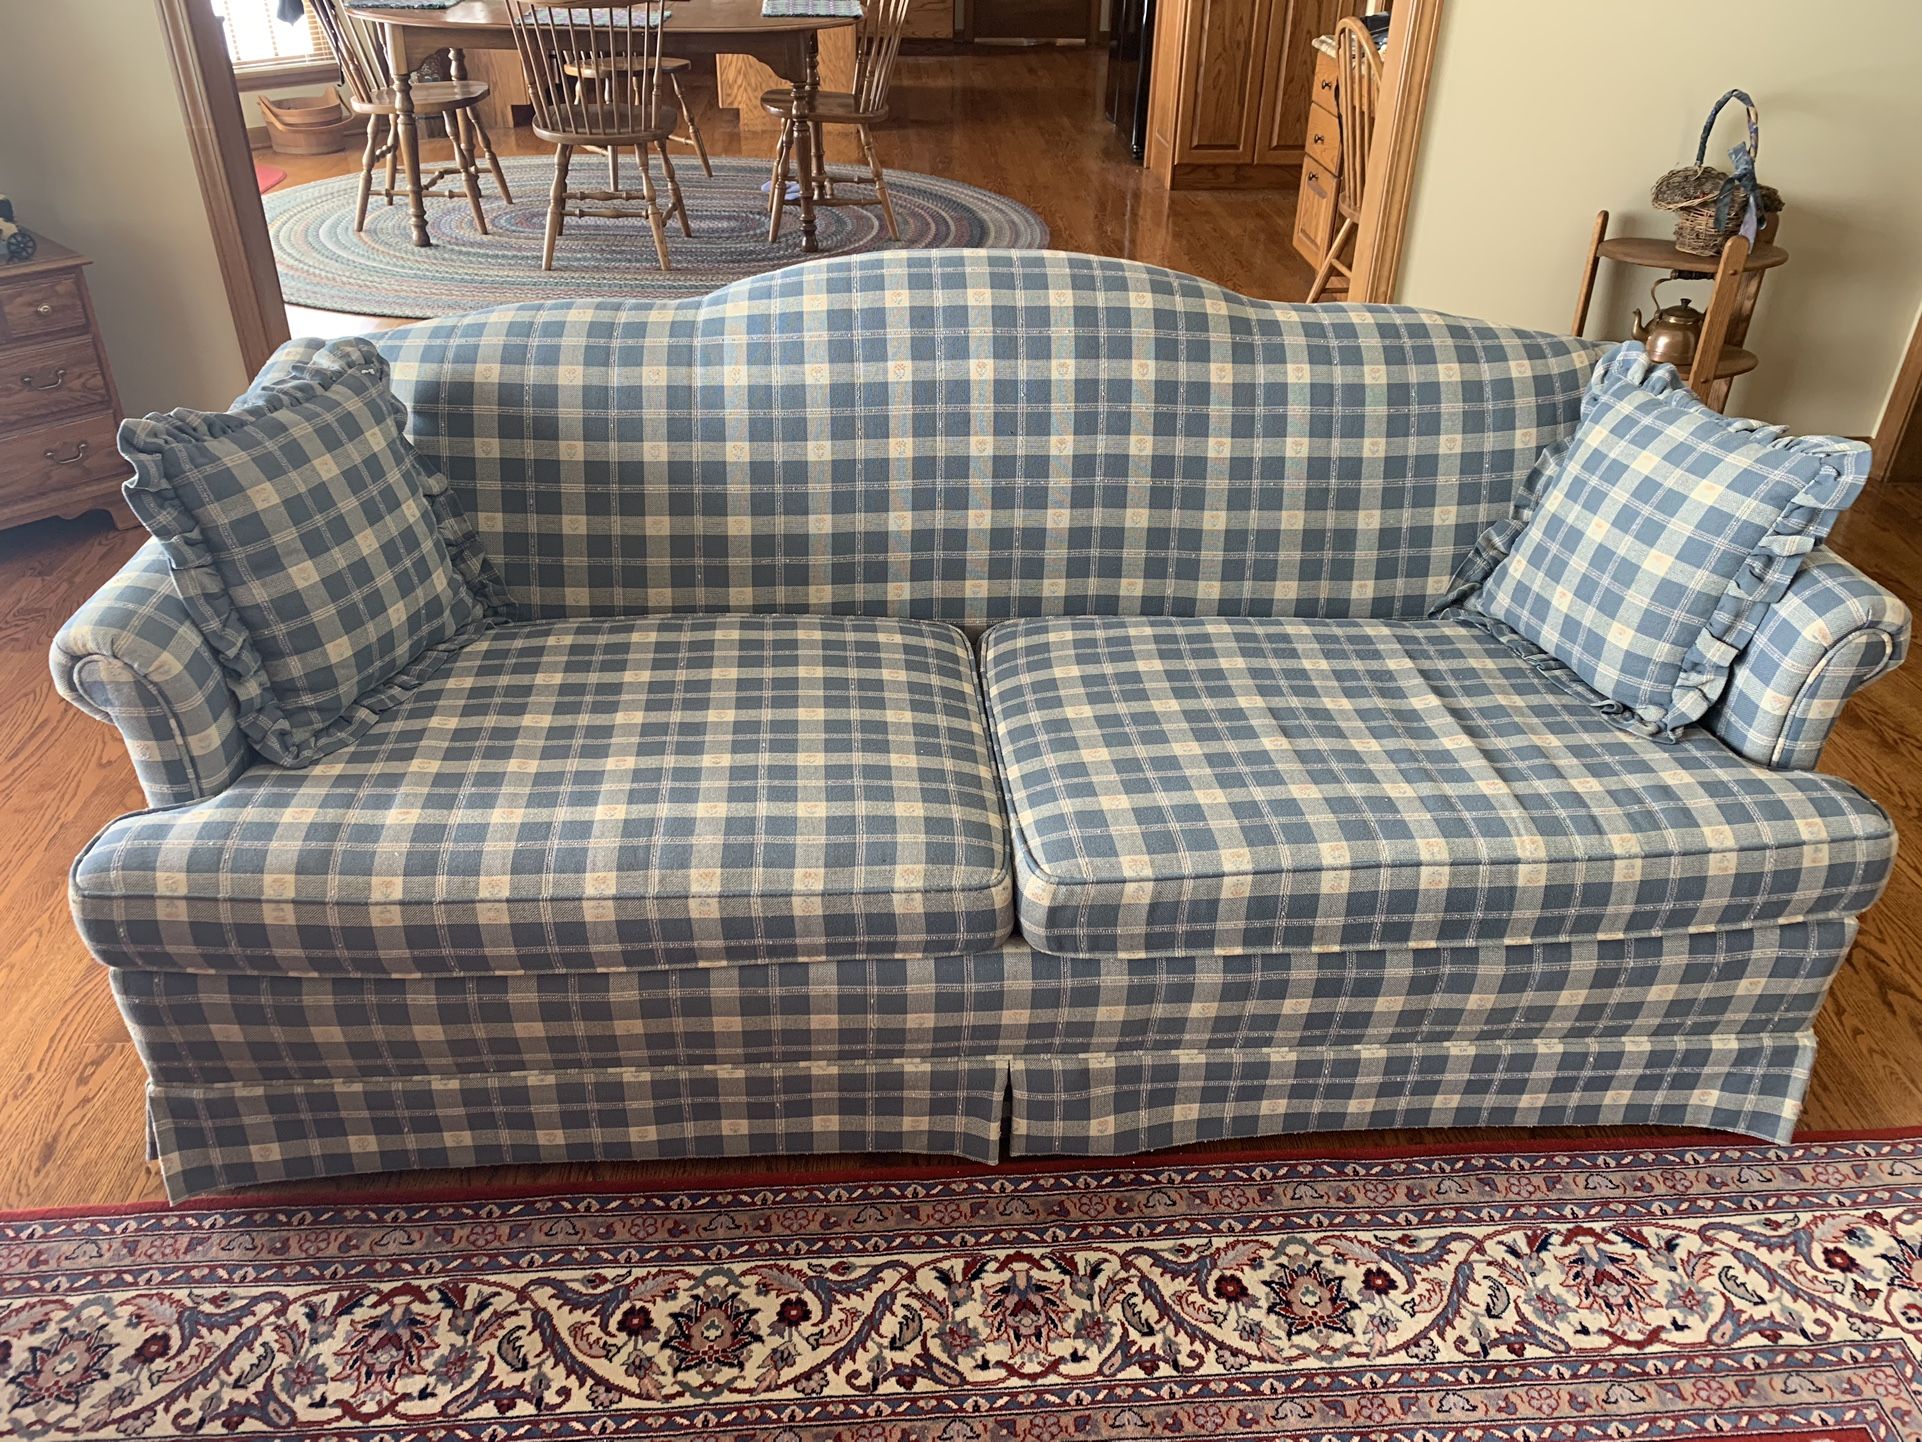 LAINE COUCH,BLUE/CRÈME CHECK,SMALL ROSE FLORAL PRINT,76Wx34Dx34H,VERY NICE!